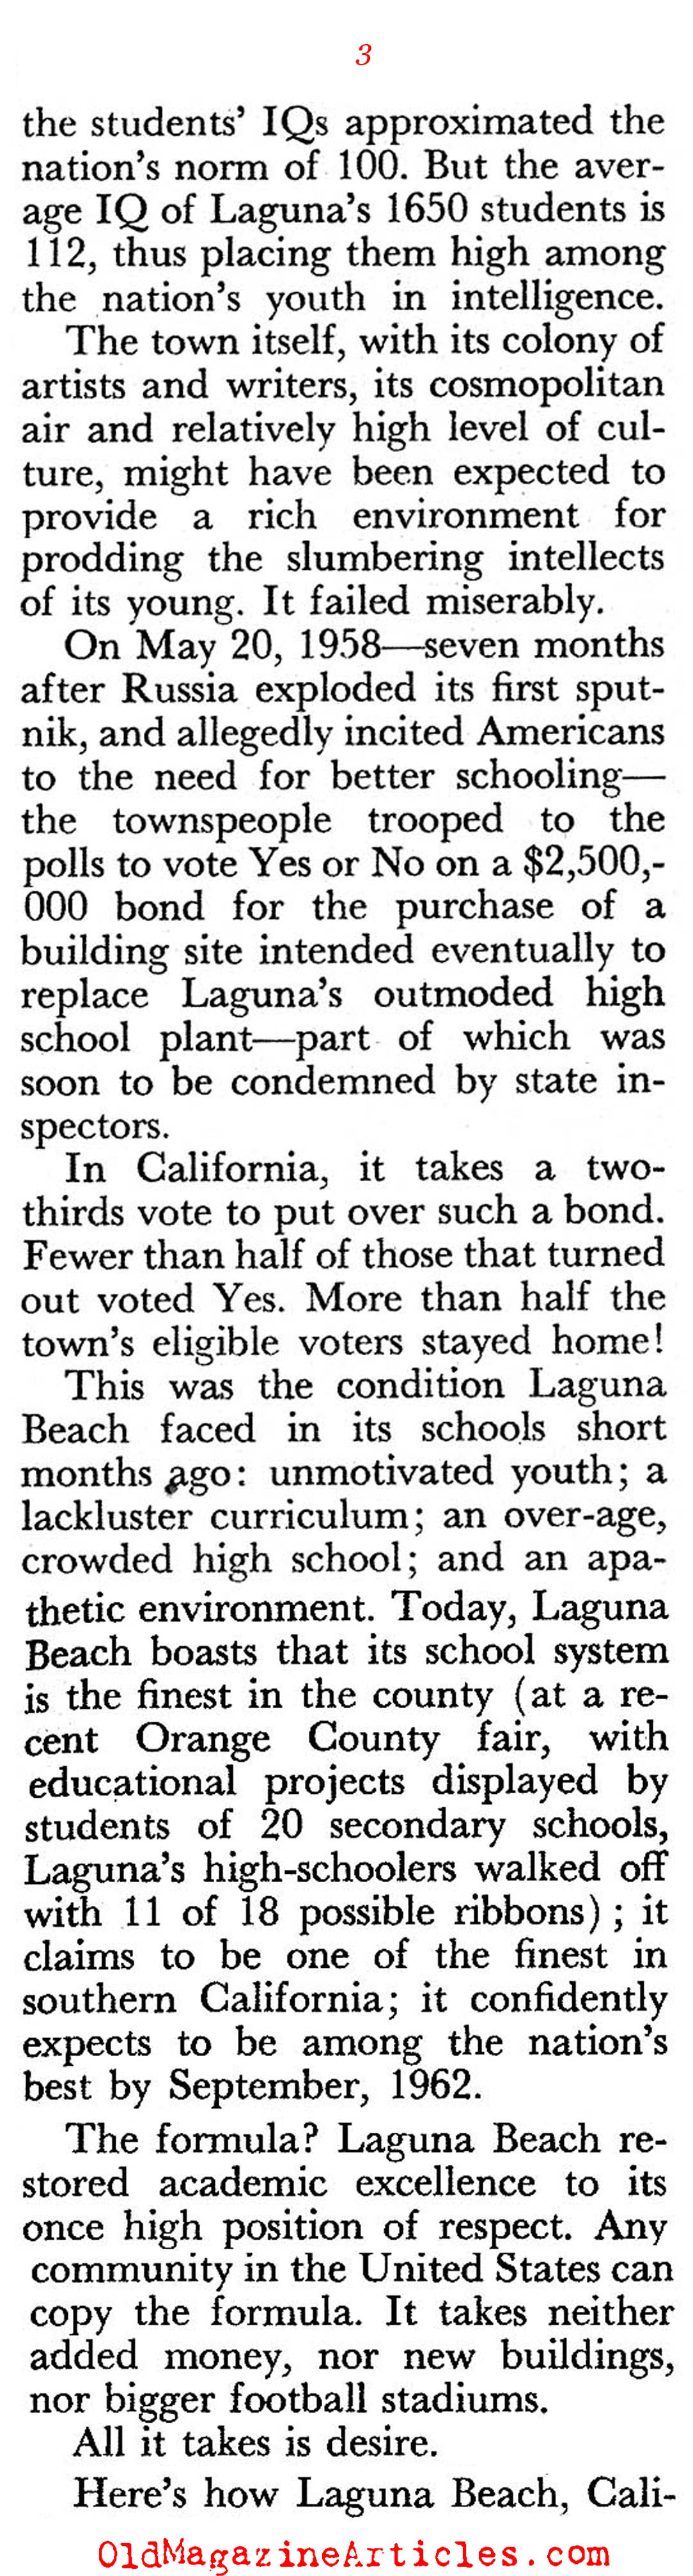 How One School Turned Itself Around (Pageant Magazine, 1961)